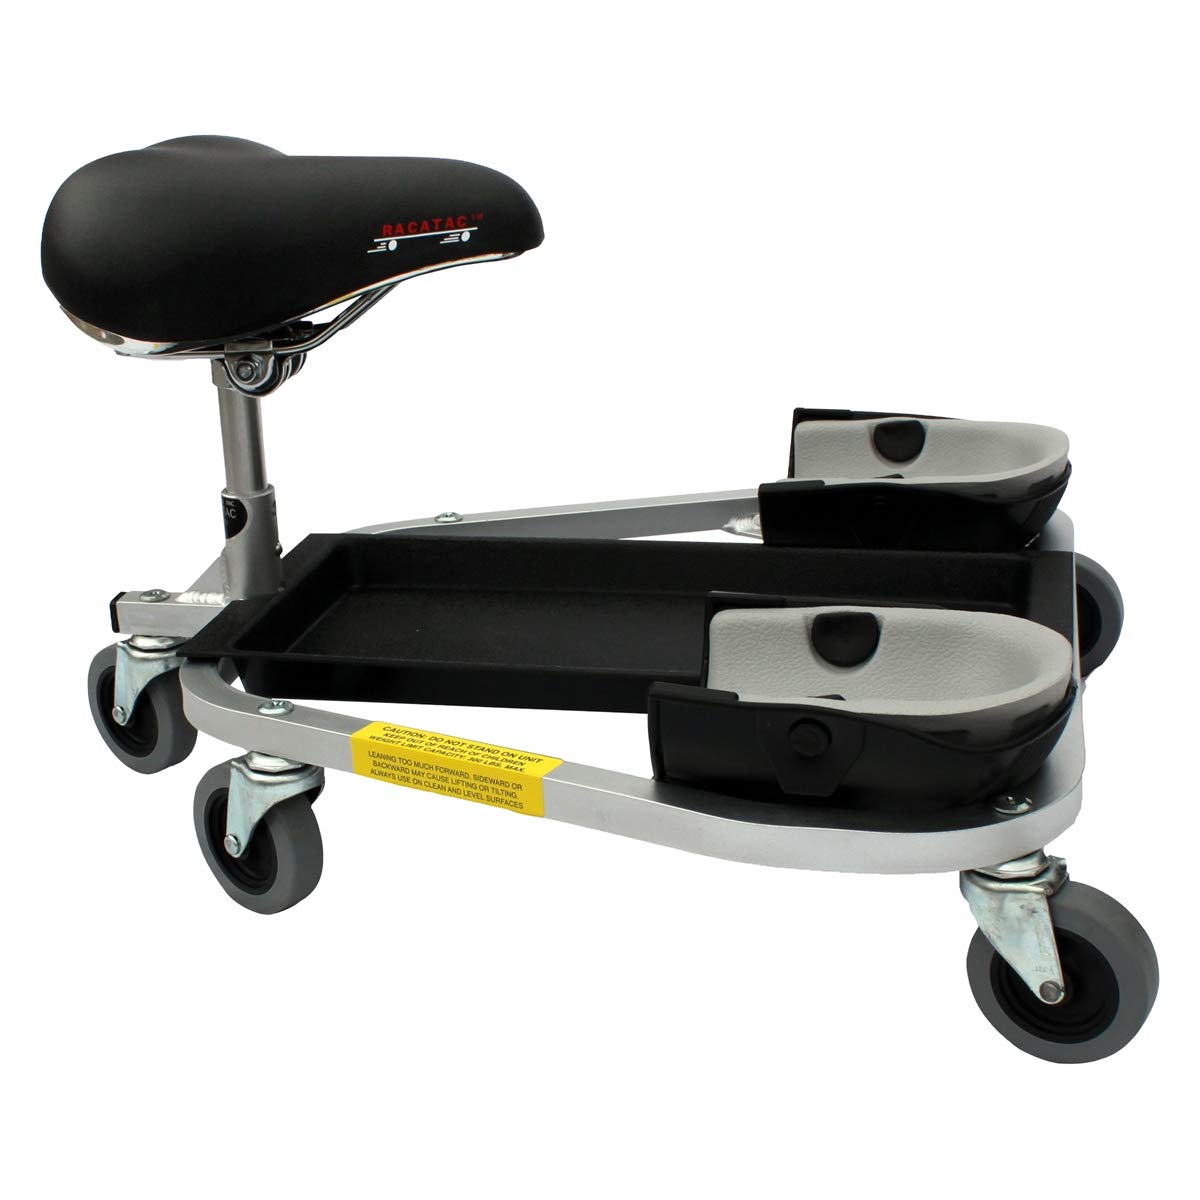 Racatac Knee Cart Products